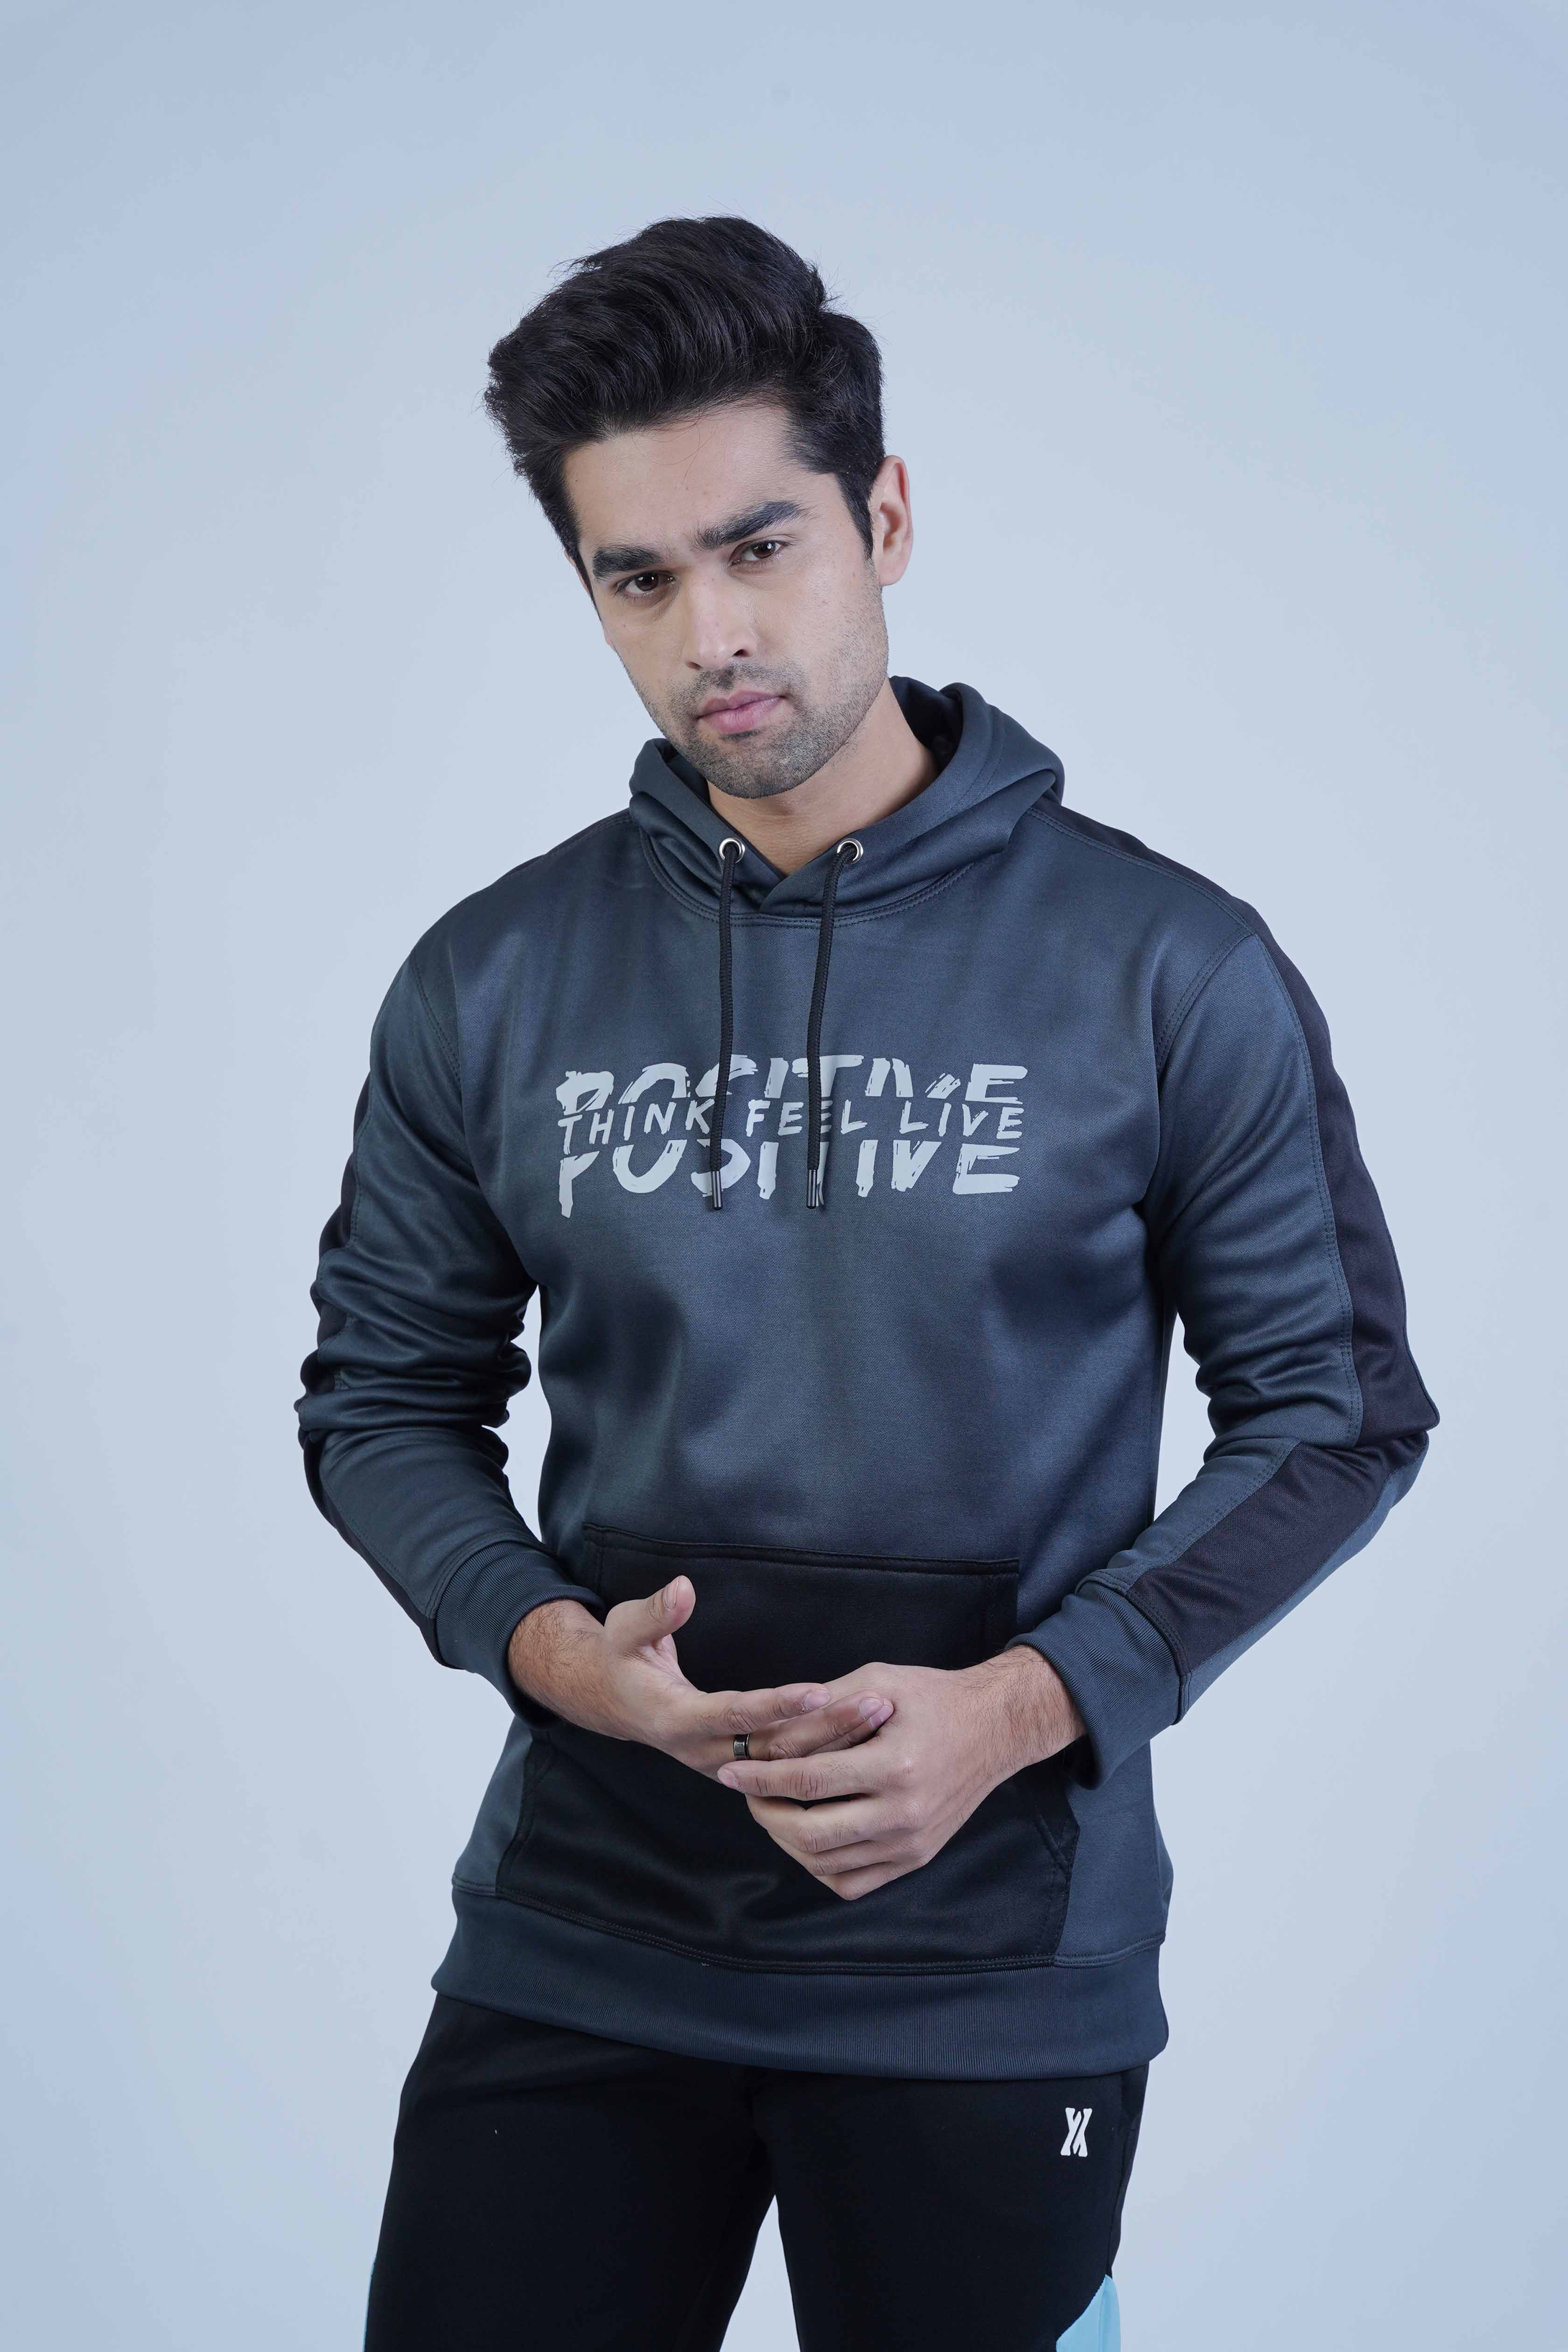 Stylish Men's Grey and Black Hoodie - The Xea Positive Style